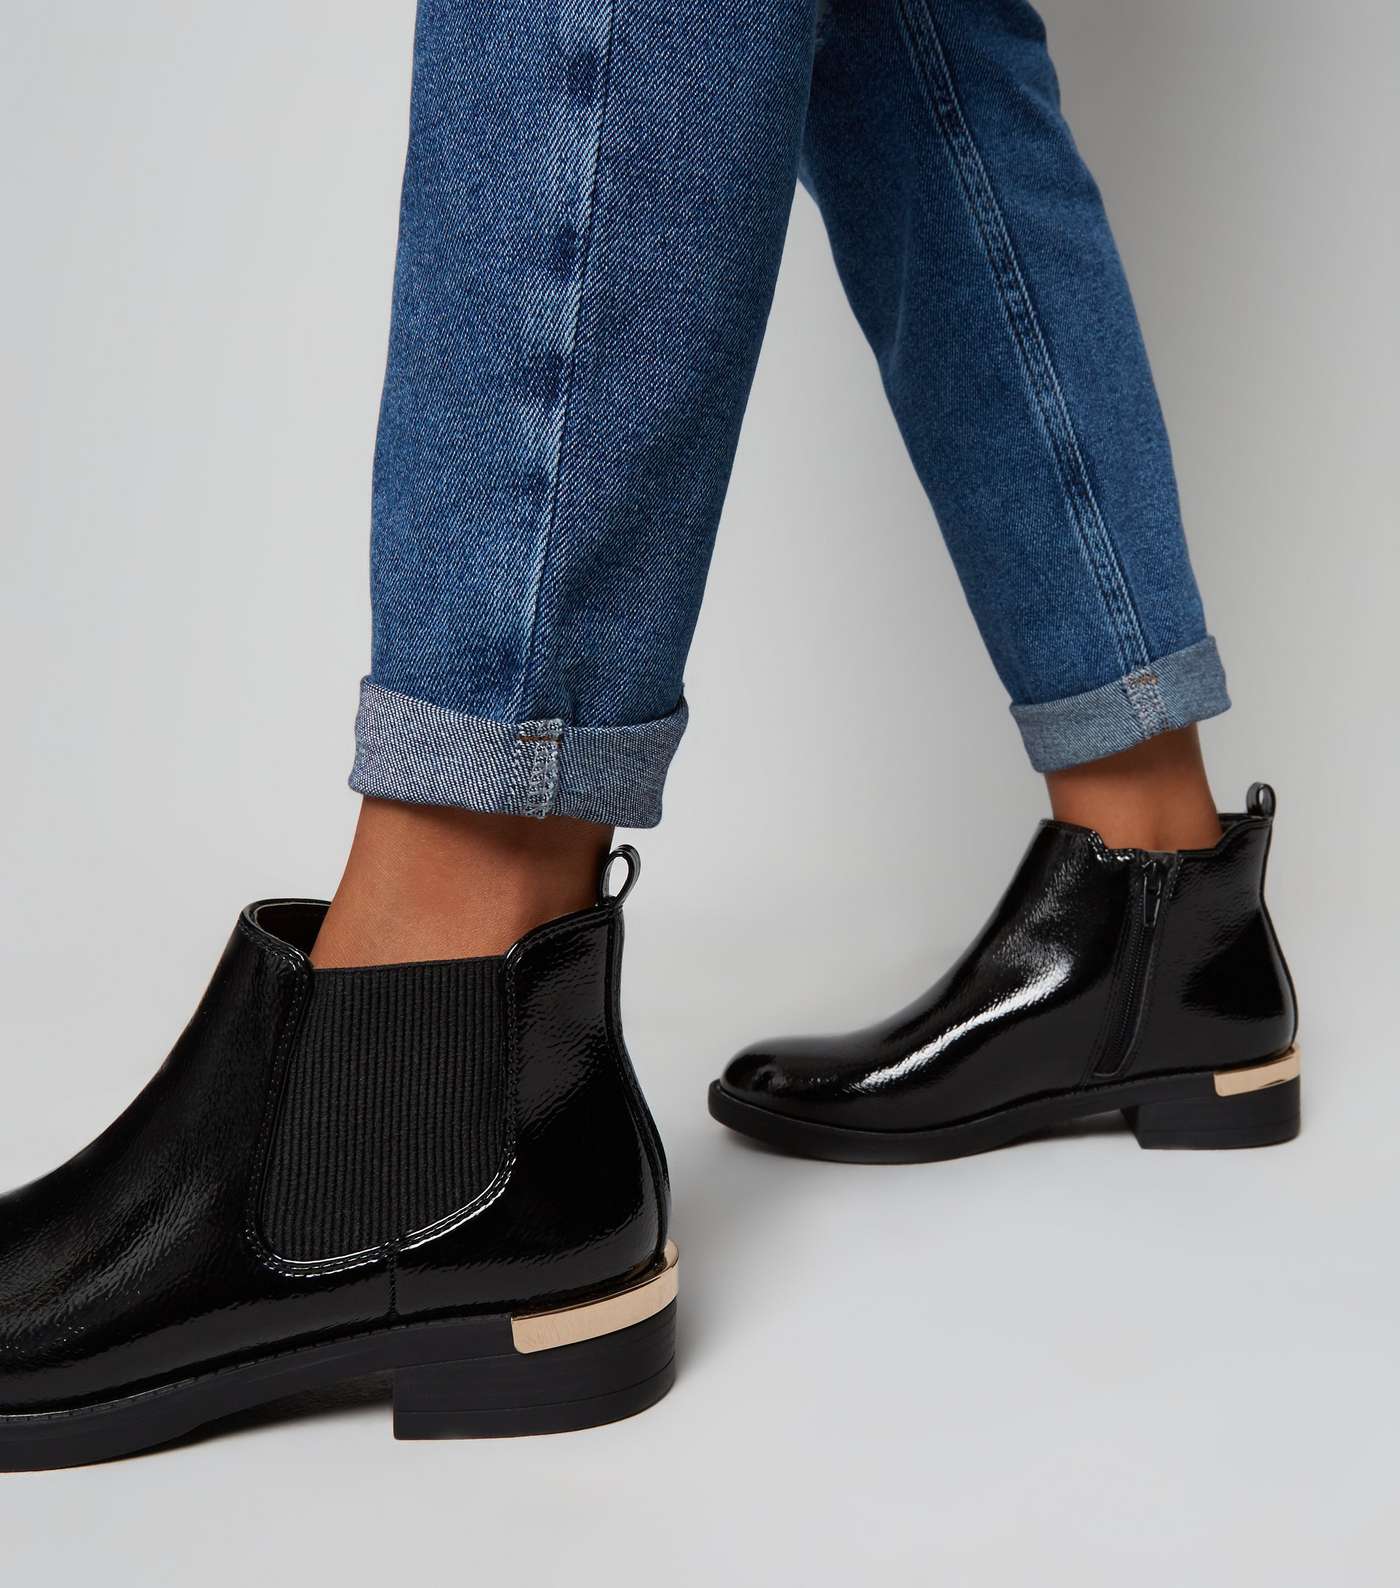 Girls Black Patent Chelsea Boots Image 2